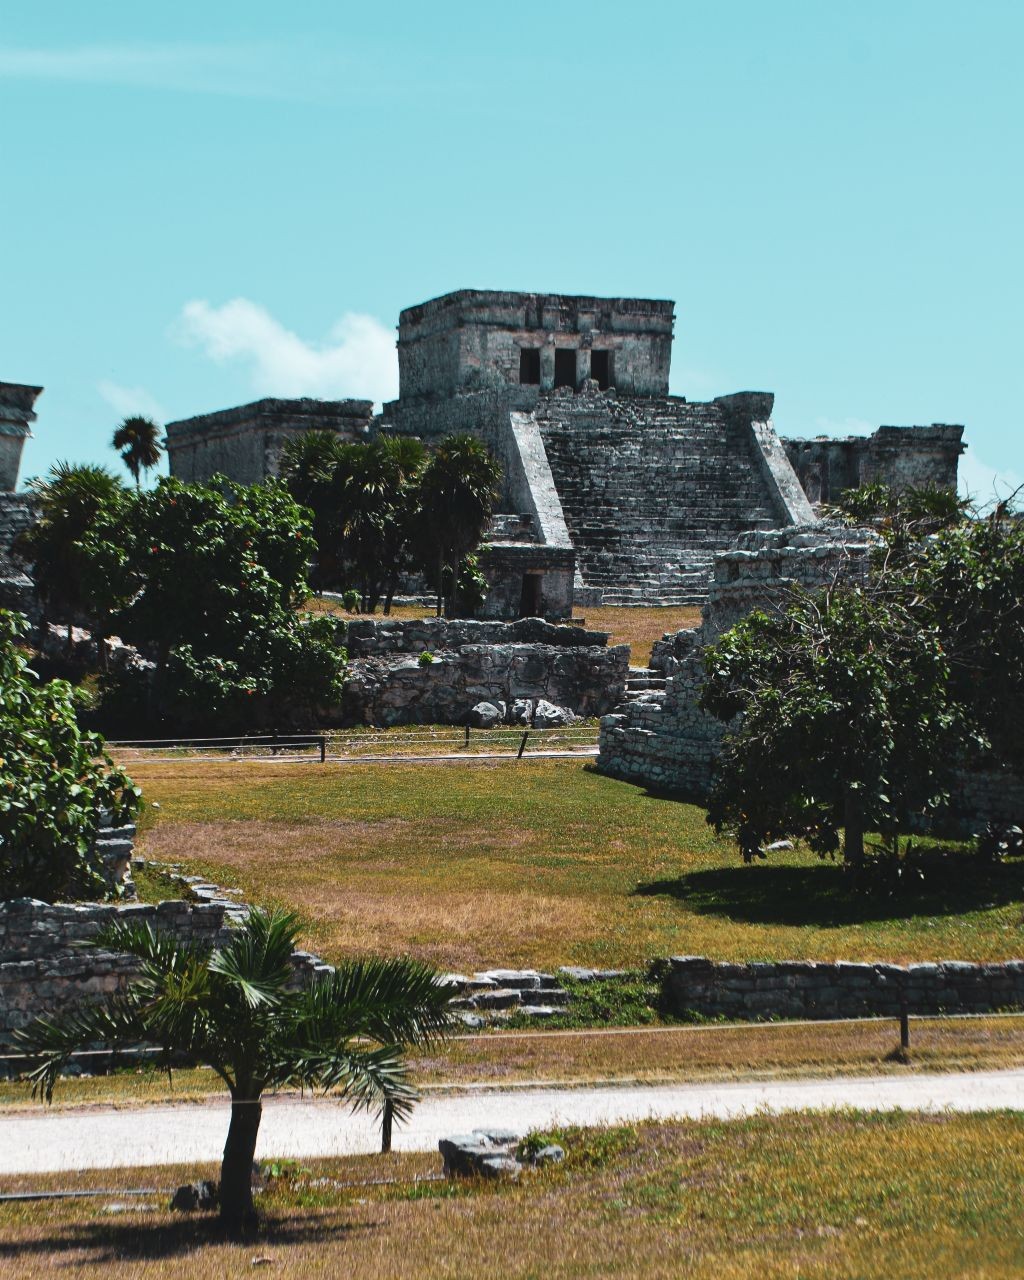 Tulum: Located along the Caribbean coast, Tulum is a picturesque coastal town with well-preserved Mayan ruins overlooking the turquoise waters.